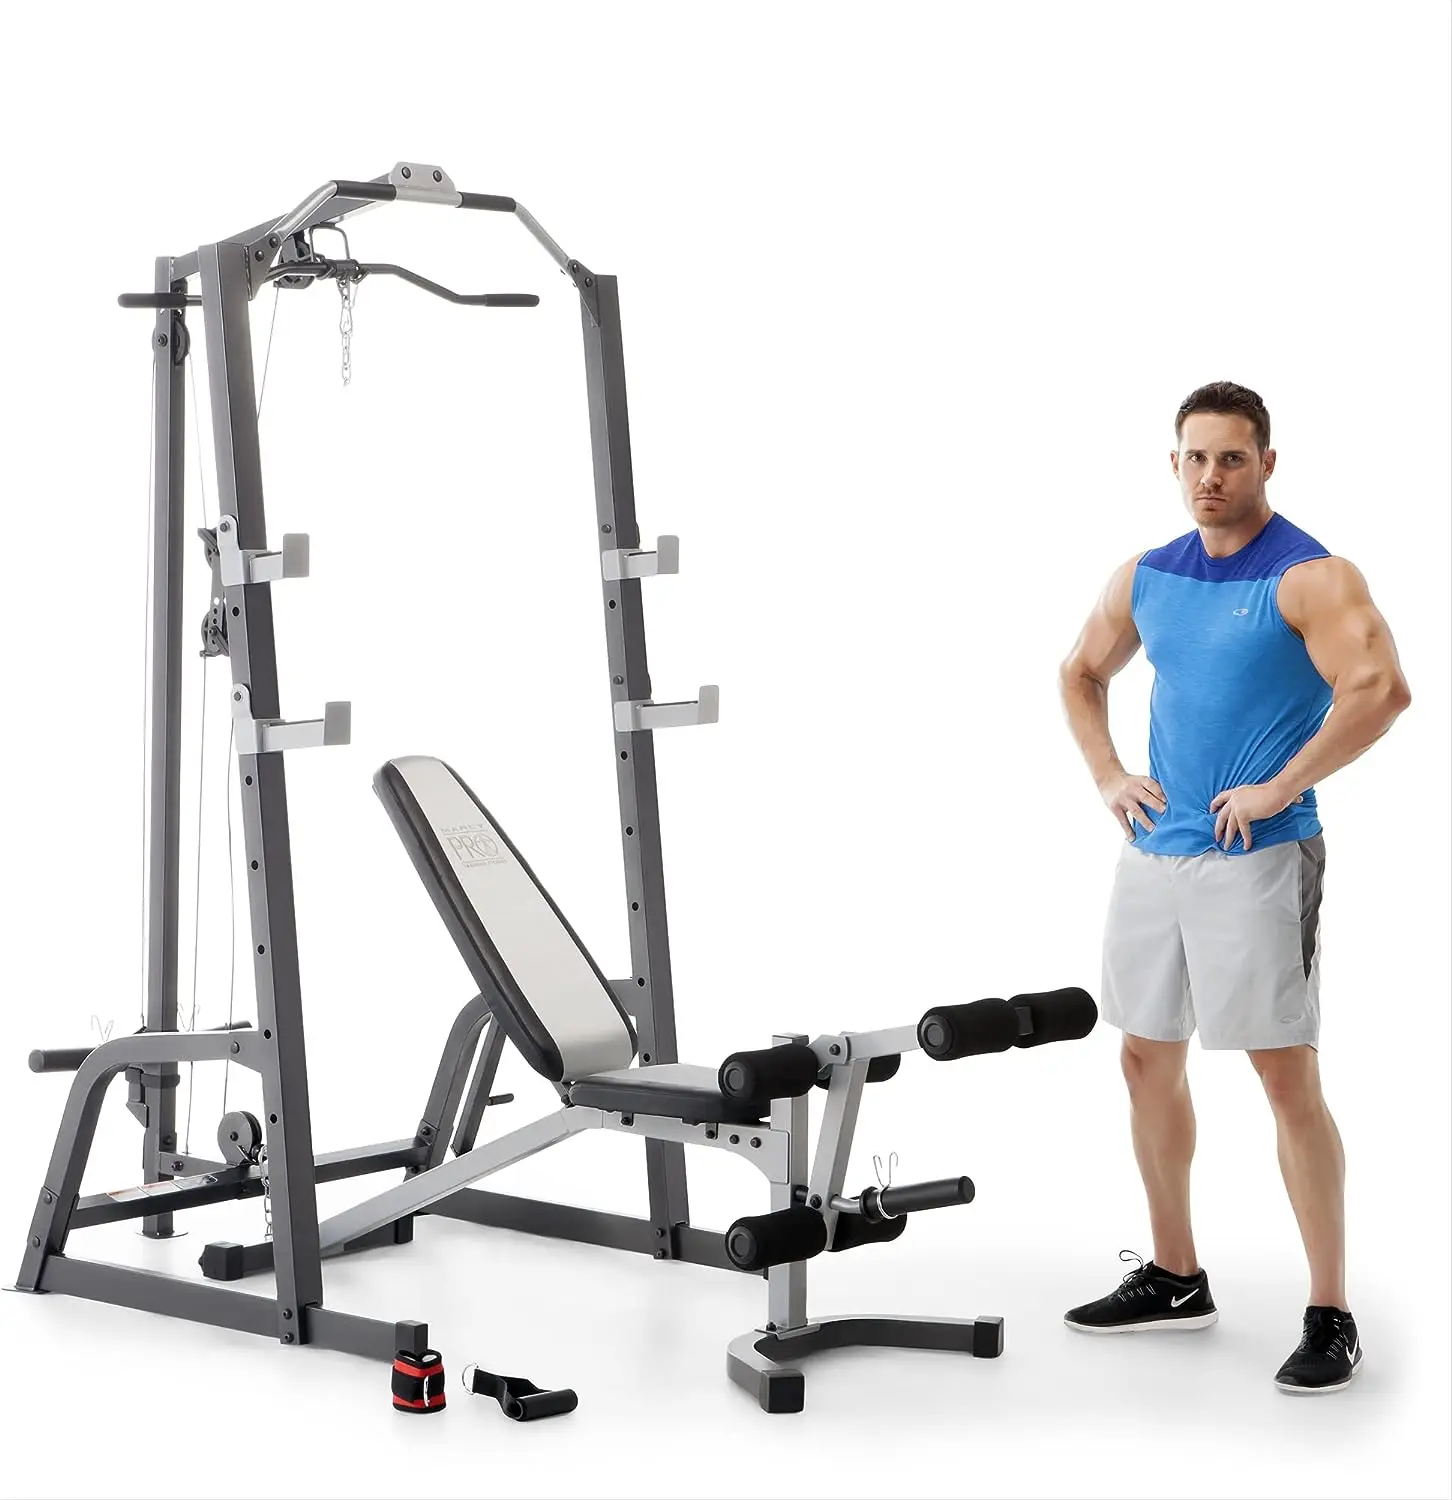 

Deluxe Cage System with Weightlifting Bench All-in-One Home Gym Equipment PM-5108,Black/Silver